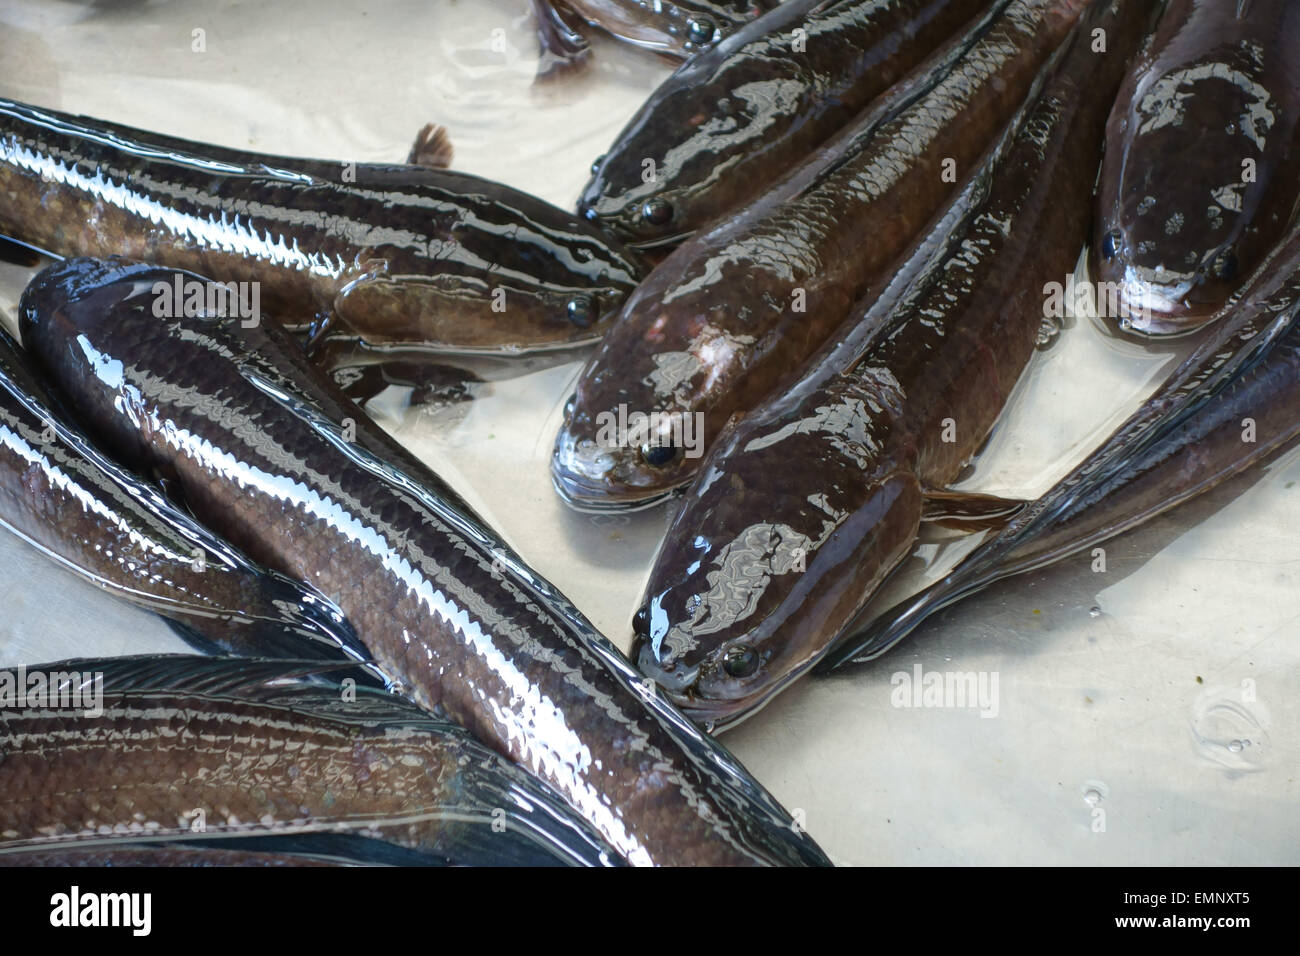 Catfish, mostly living, on a stall in aBangkok food market Stock Photo